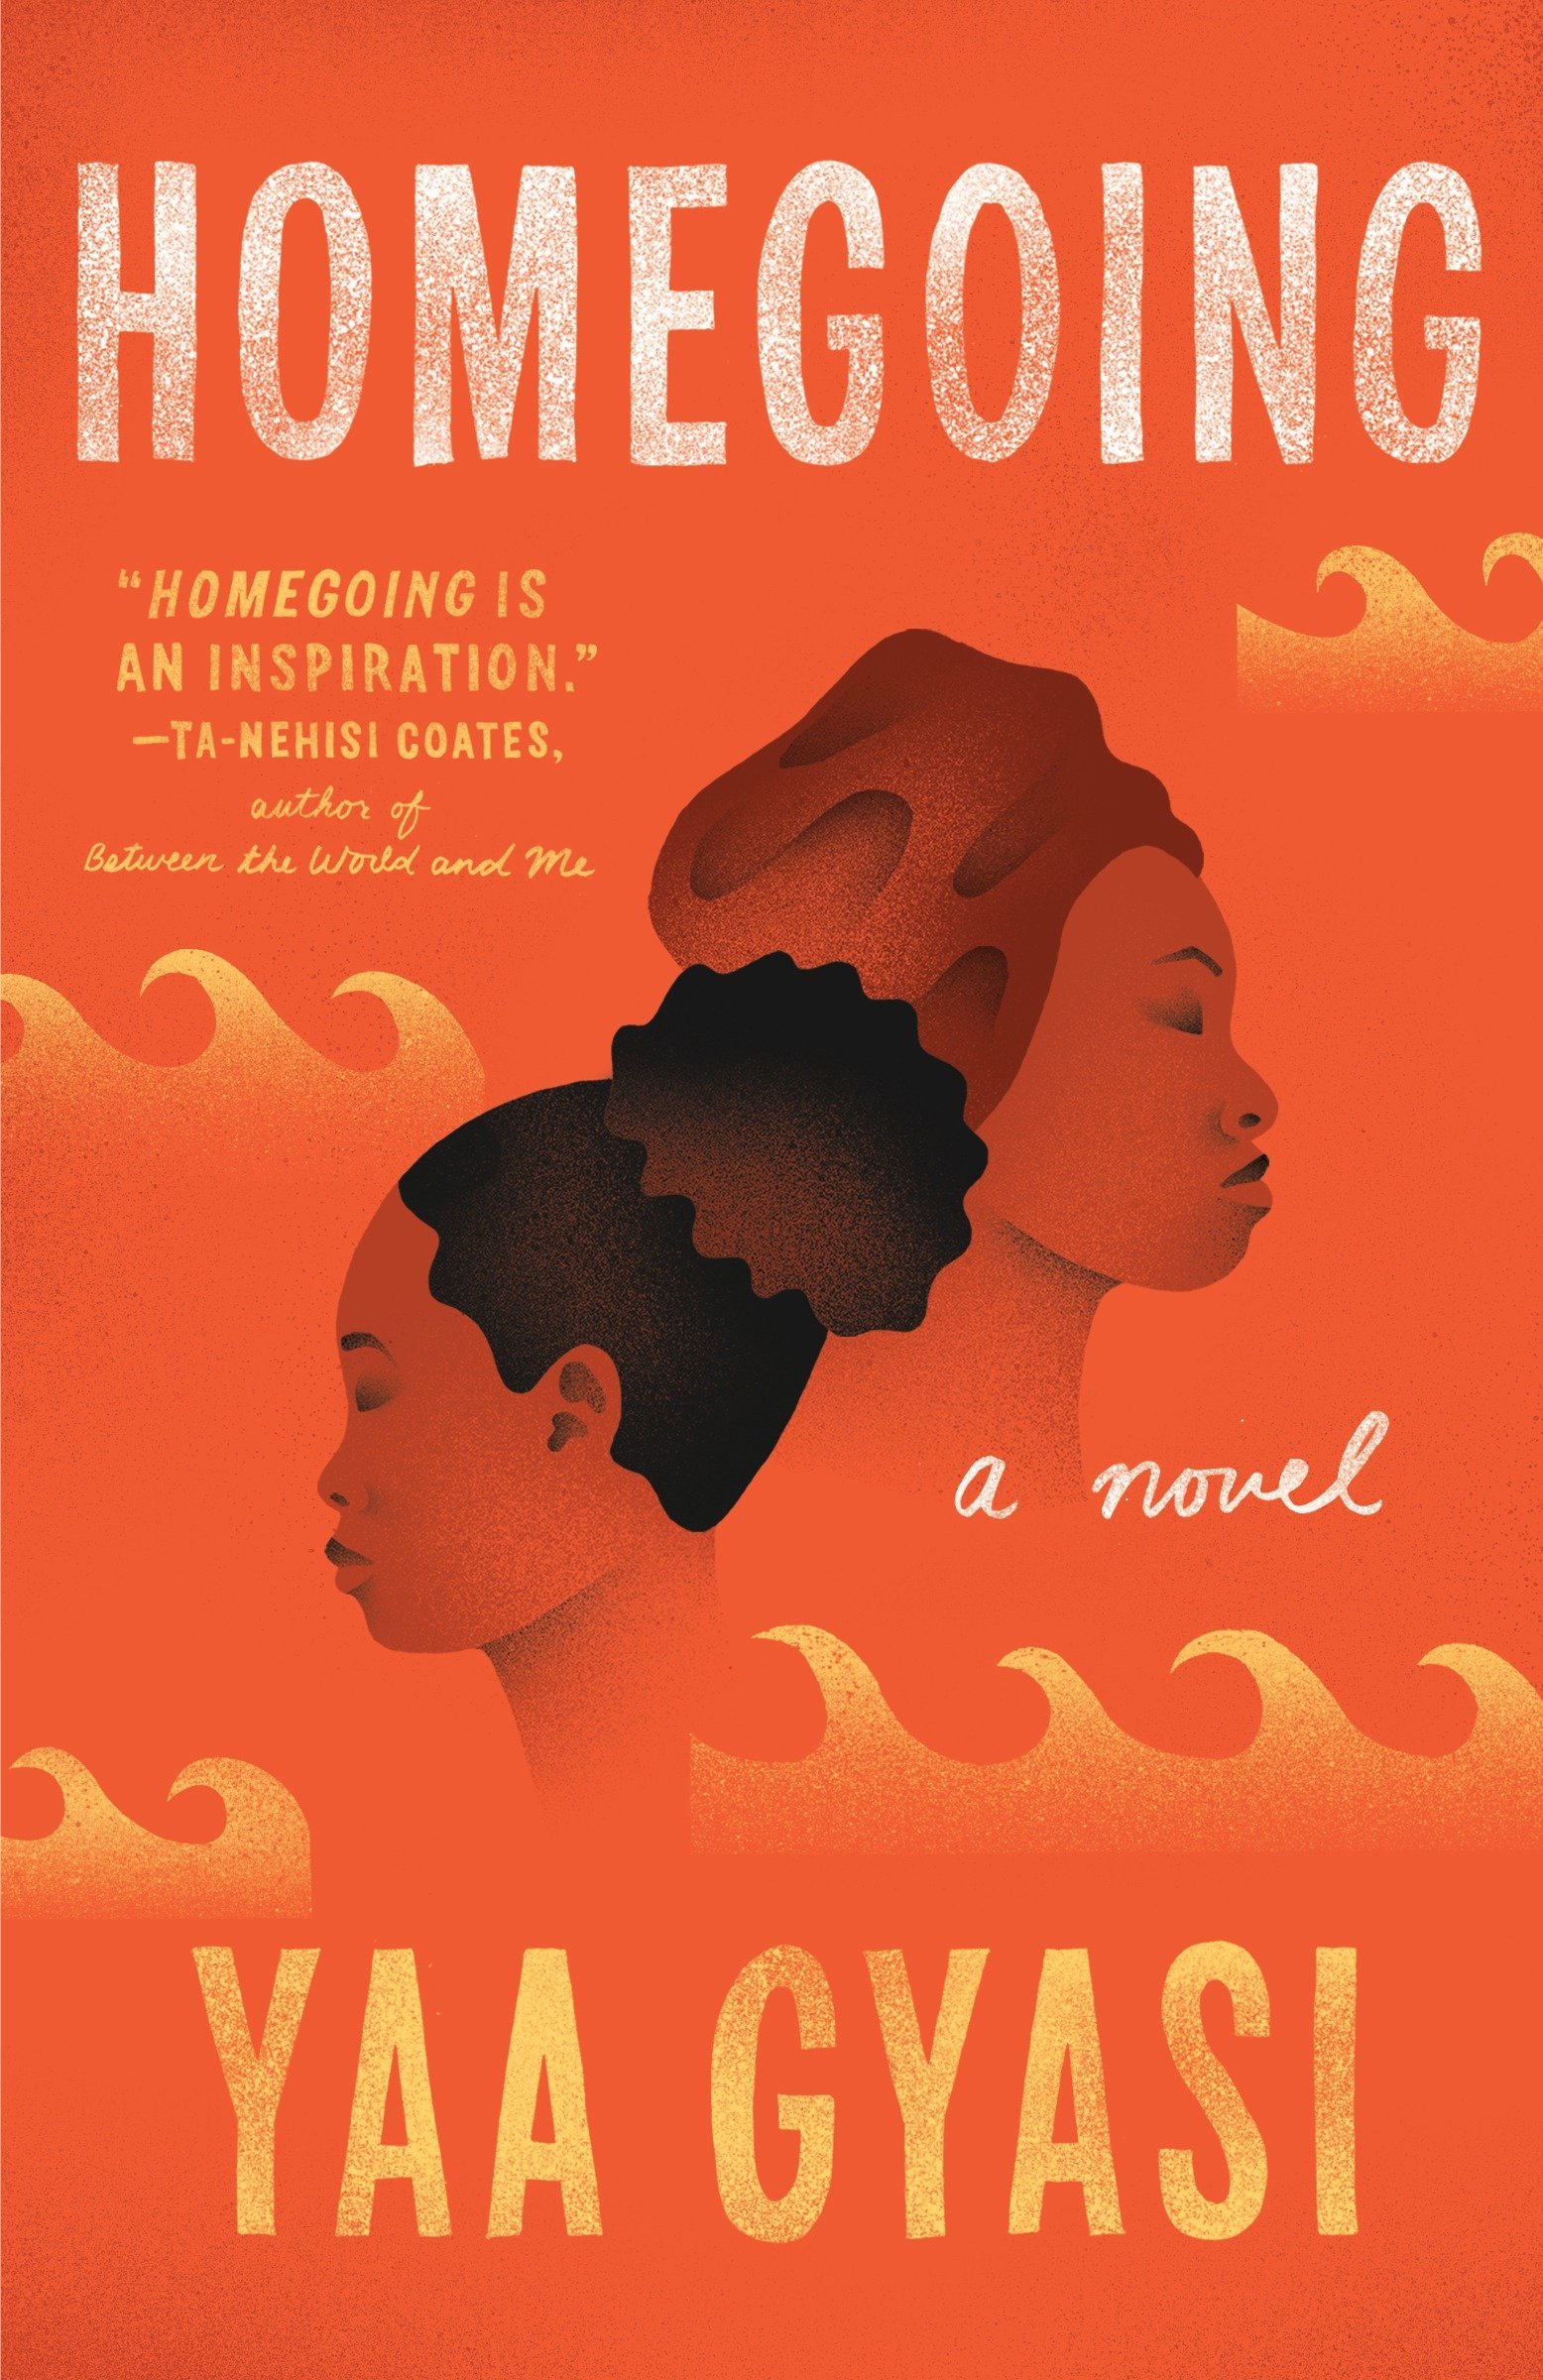 Photo of homegoing book cover